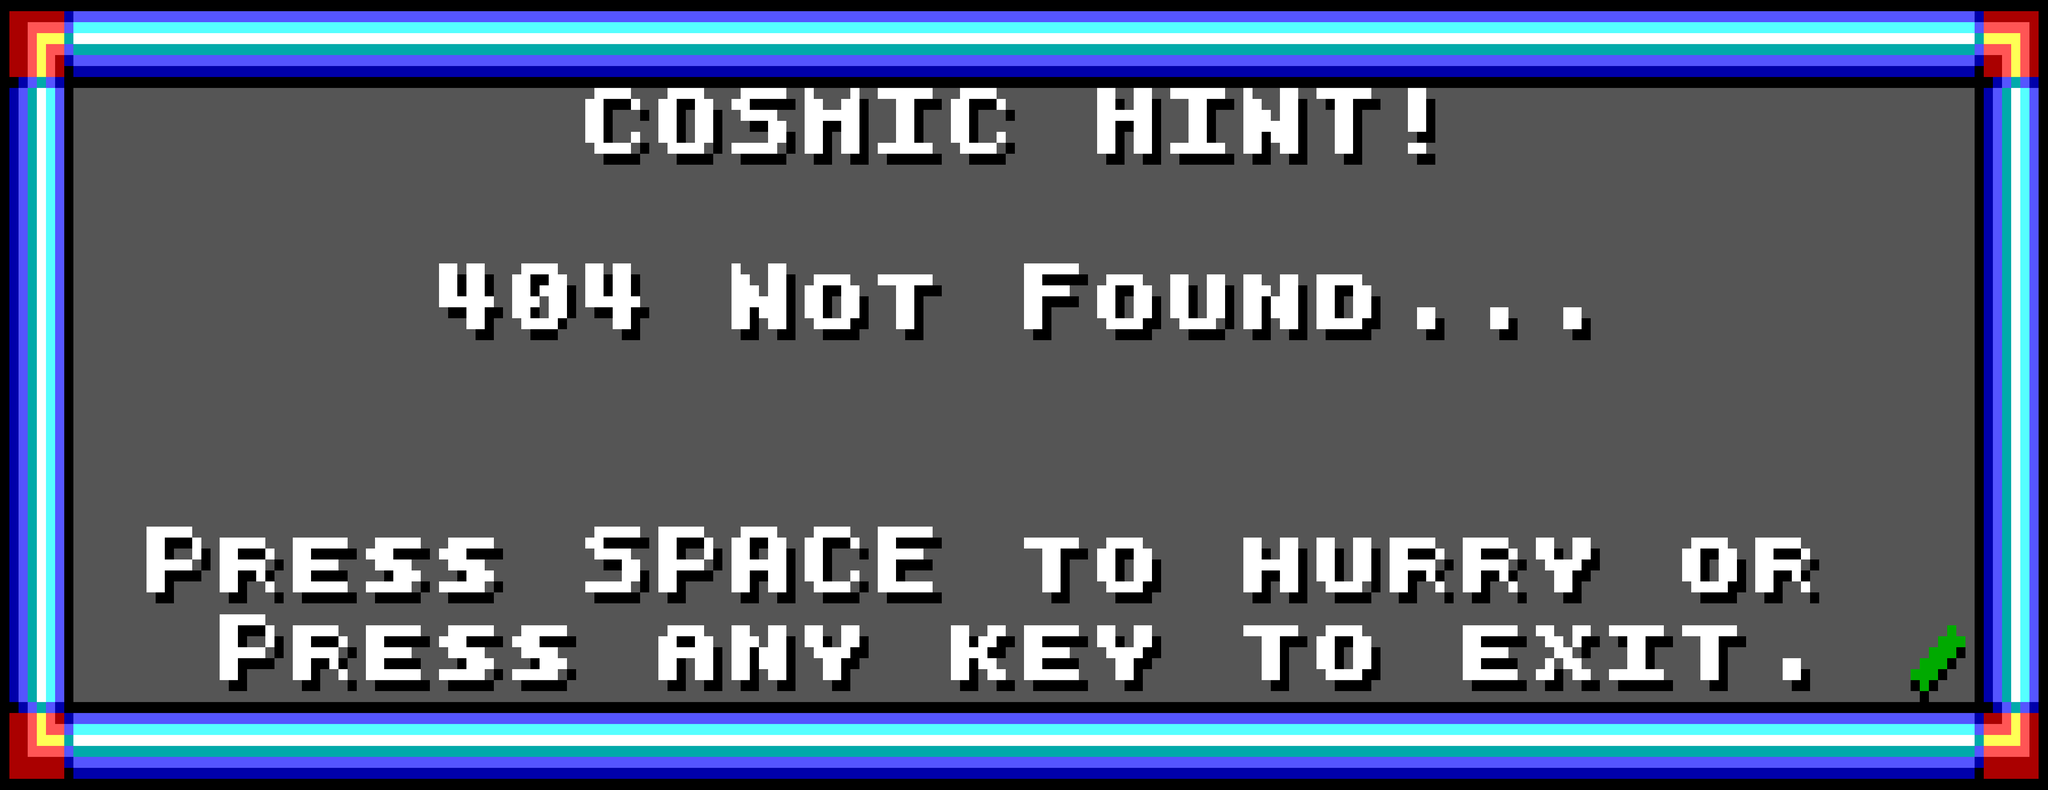 COSMIC HINT! 404 Not Found...